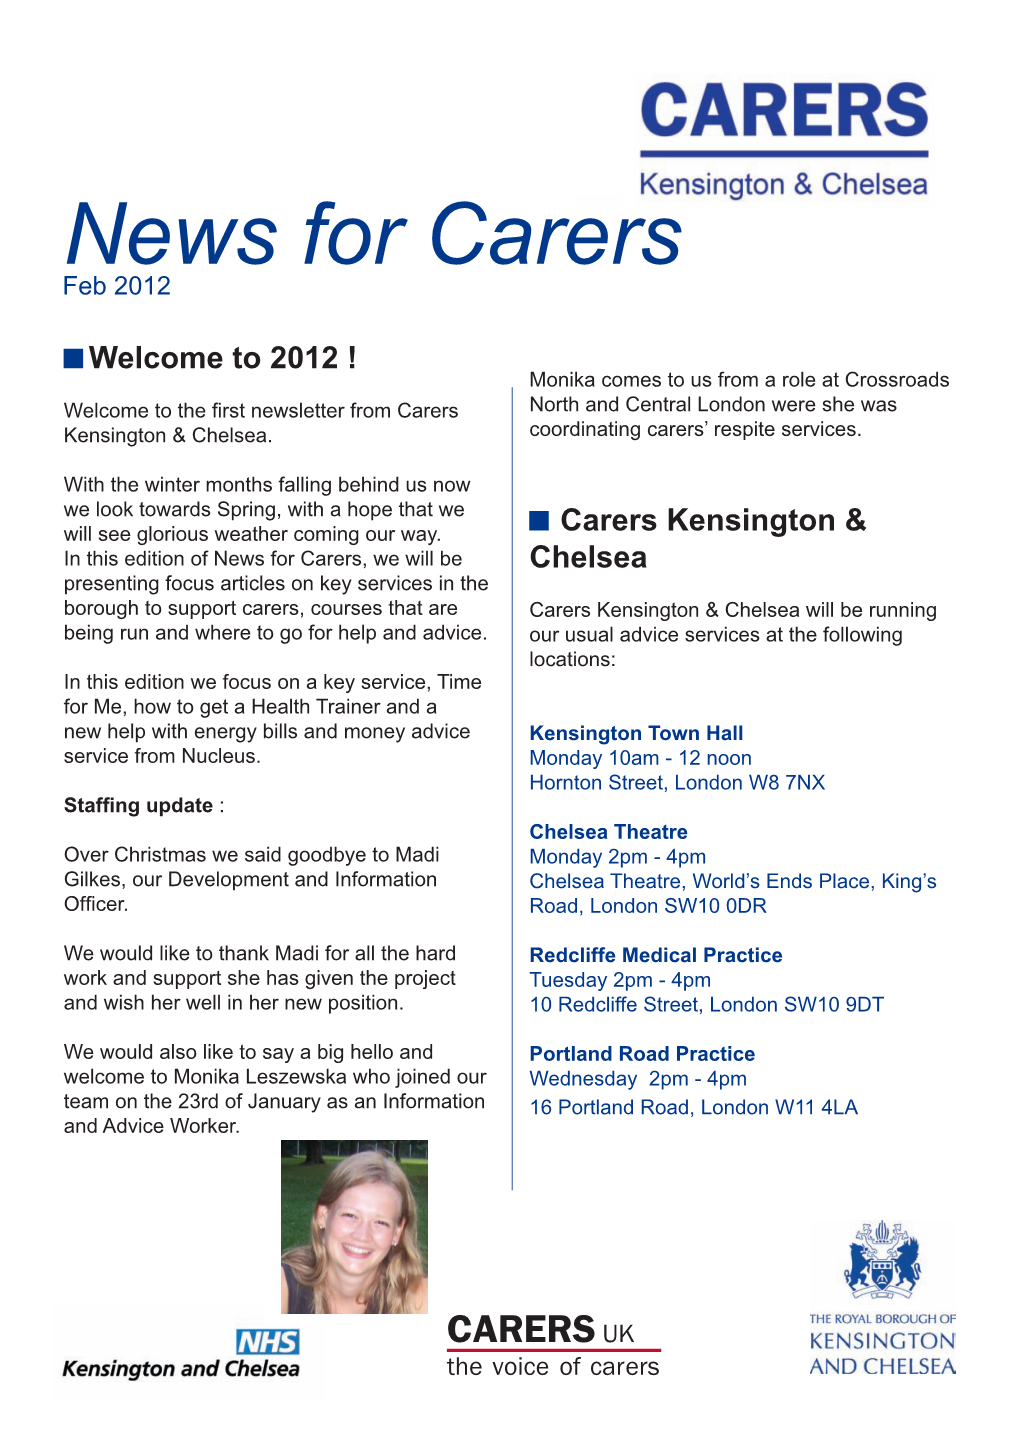 News for Carers